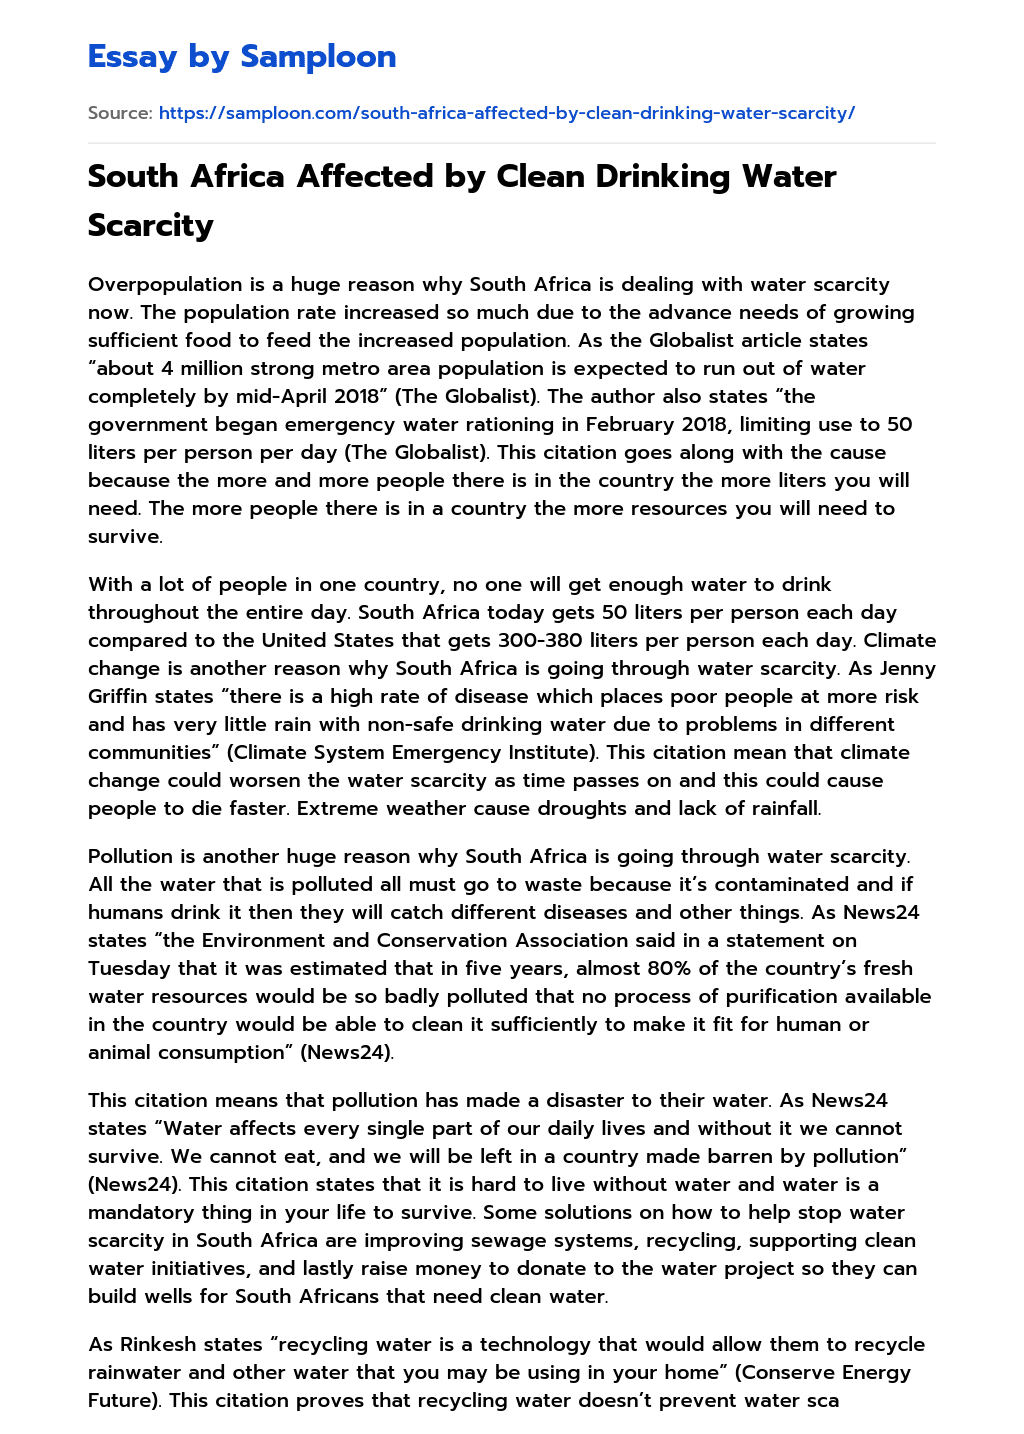 essay on scarcity of clean drinking water